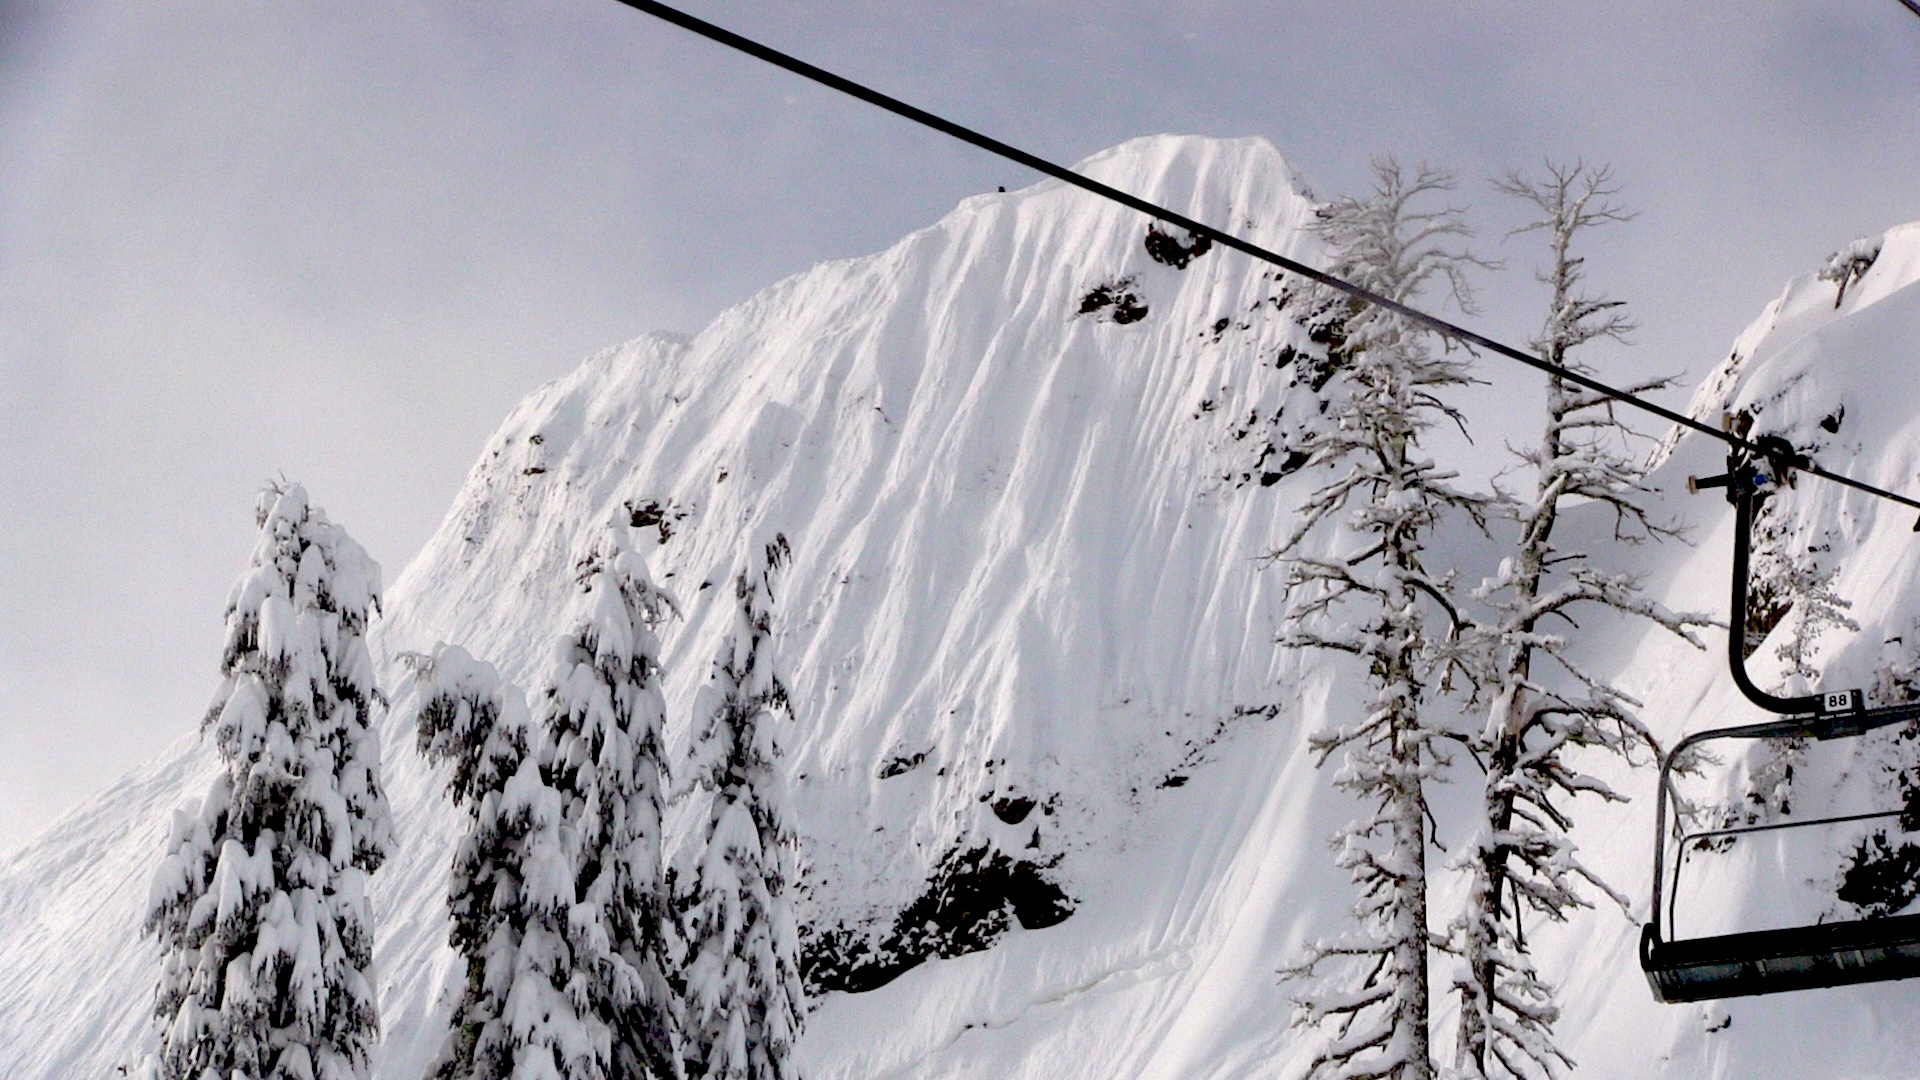 McConkey's (Eagle's Nest) at Squaw Valley in 2011. photo: miles clark/snowbrains